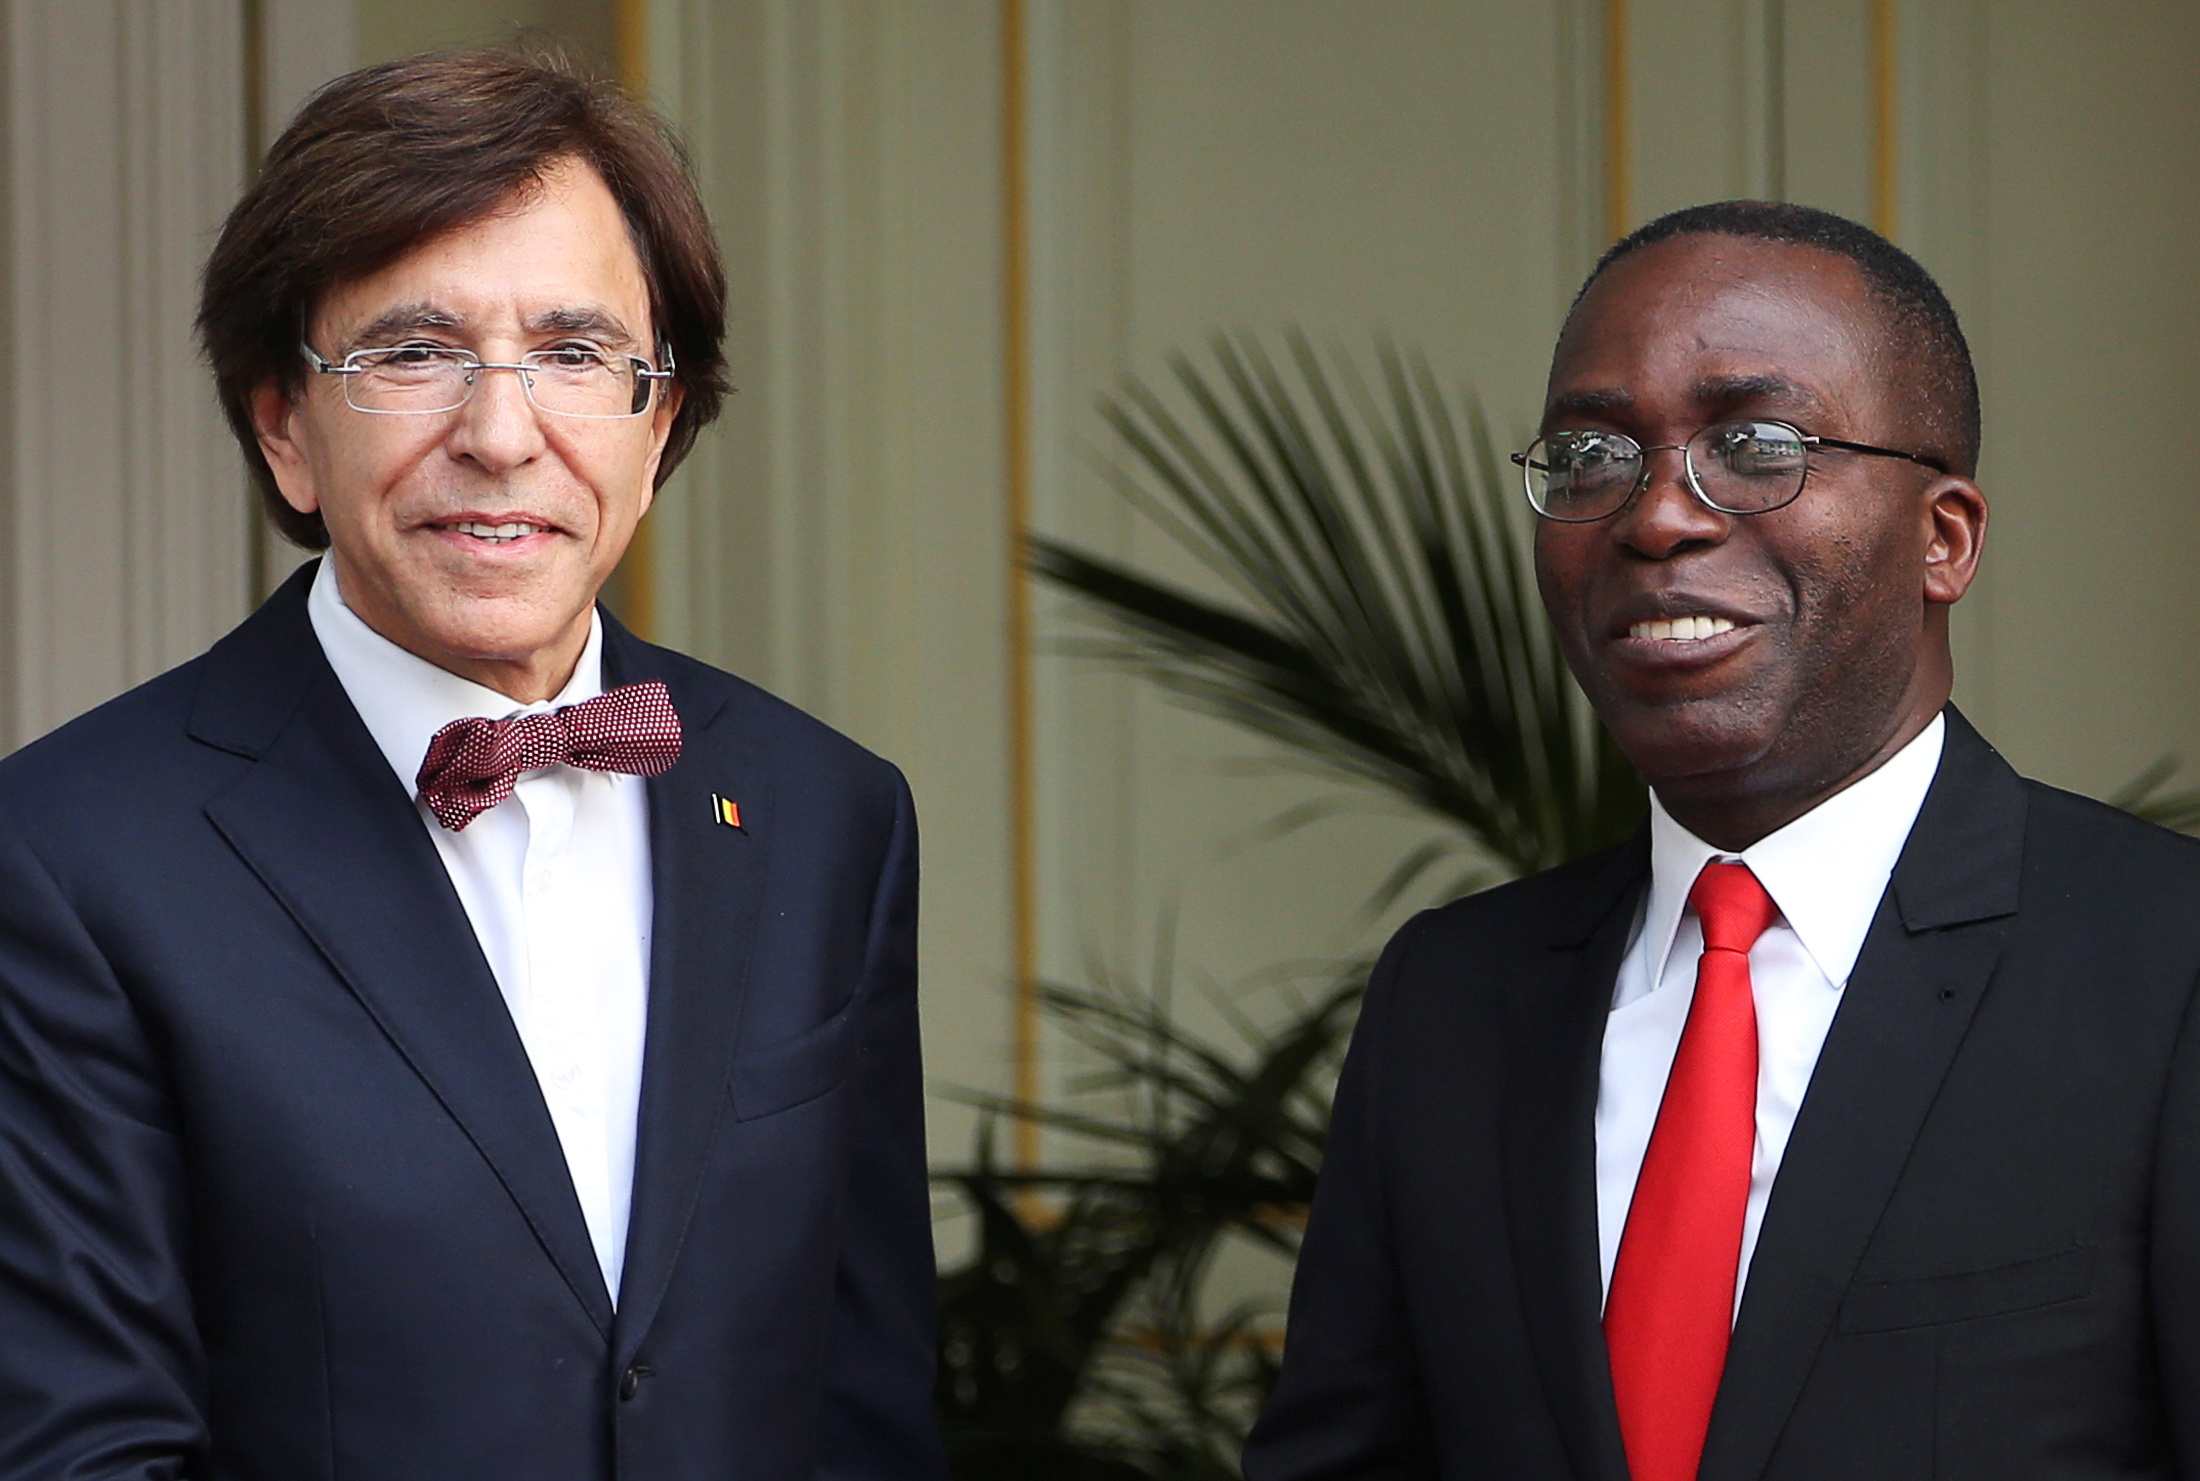 Belgium's PM Di Rupo poses with Democratic Republic of Congo's PM Matata Ponyo ahead of a meeting in Brussels